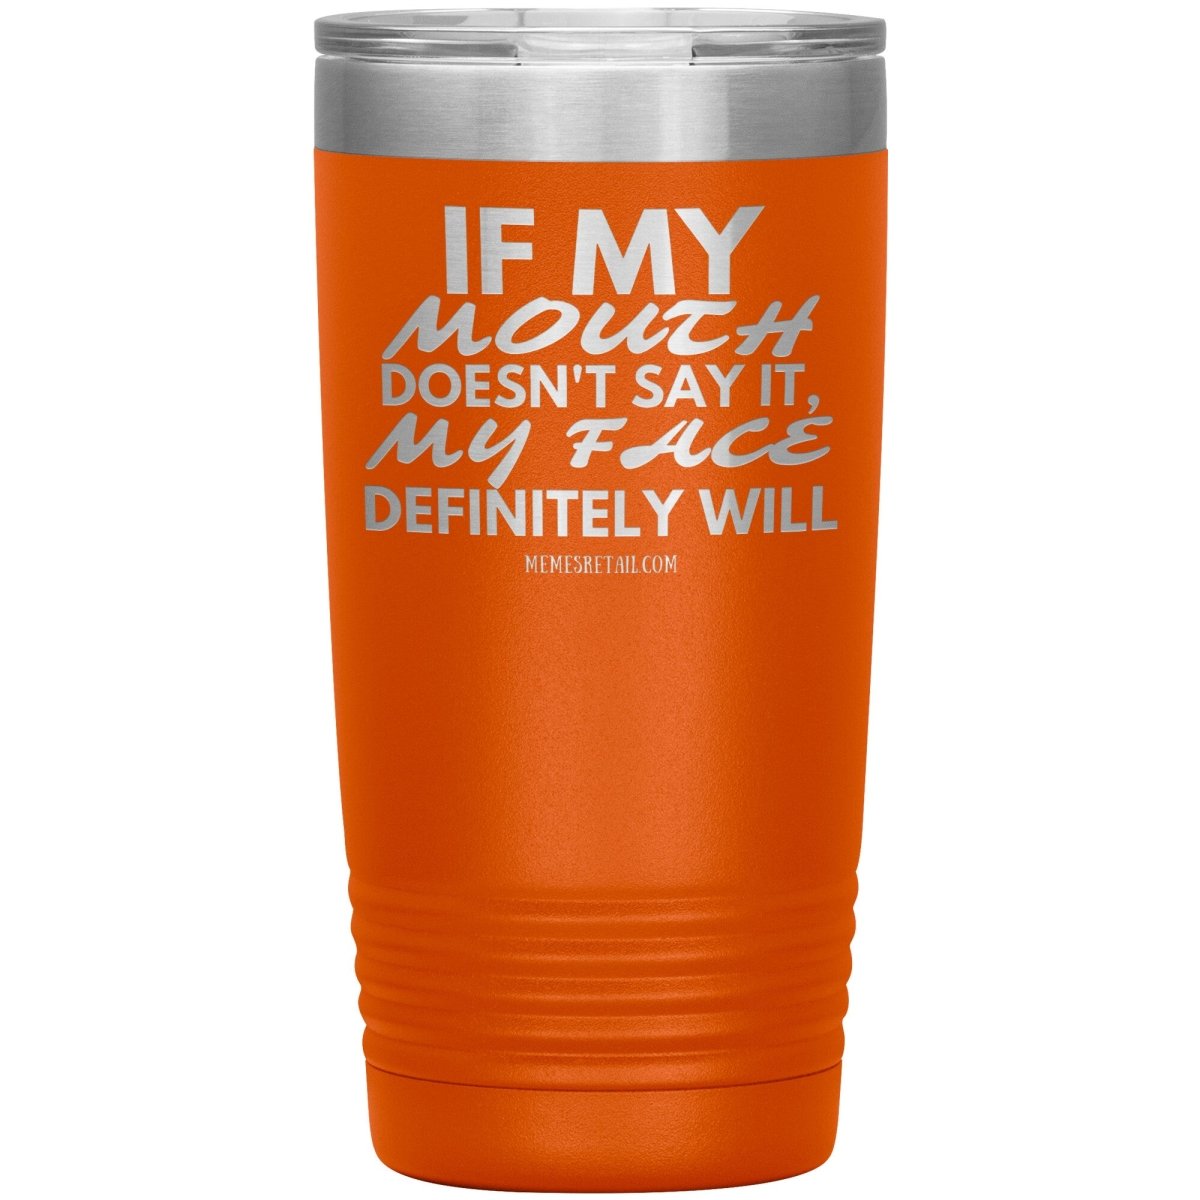 If my mouth doesn't say it, my face definitely will Tumblers, 20oz Insulated Tumbler / Orange - MemesRetail.com